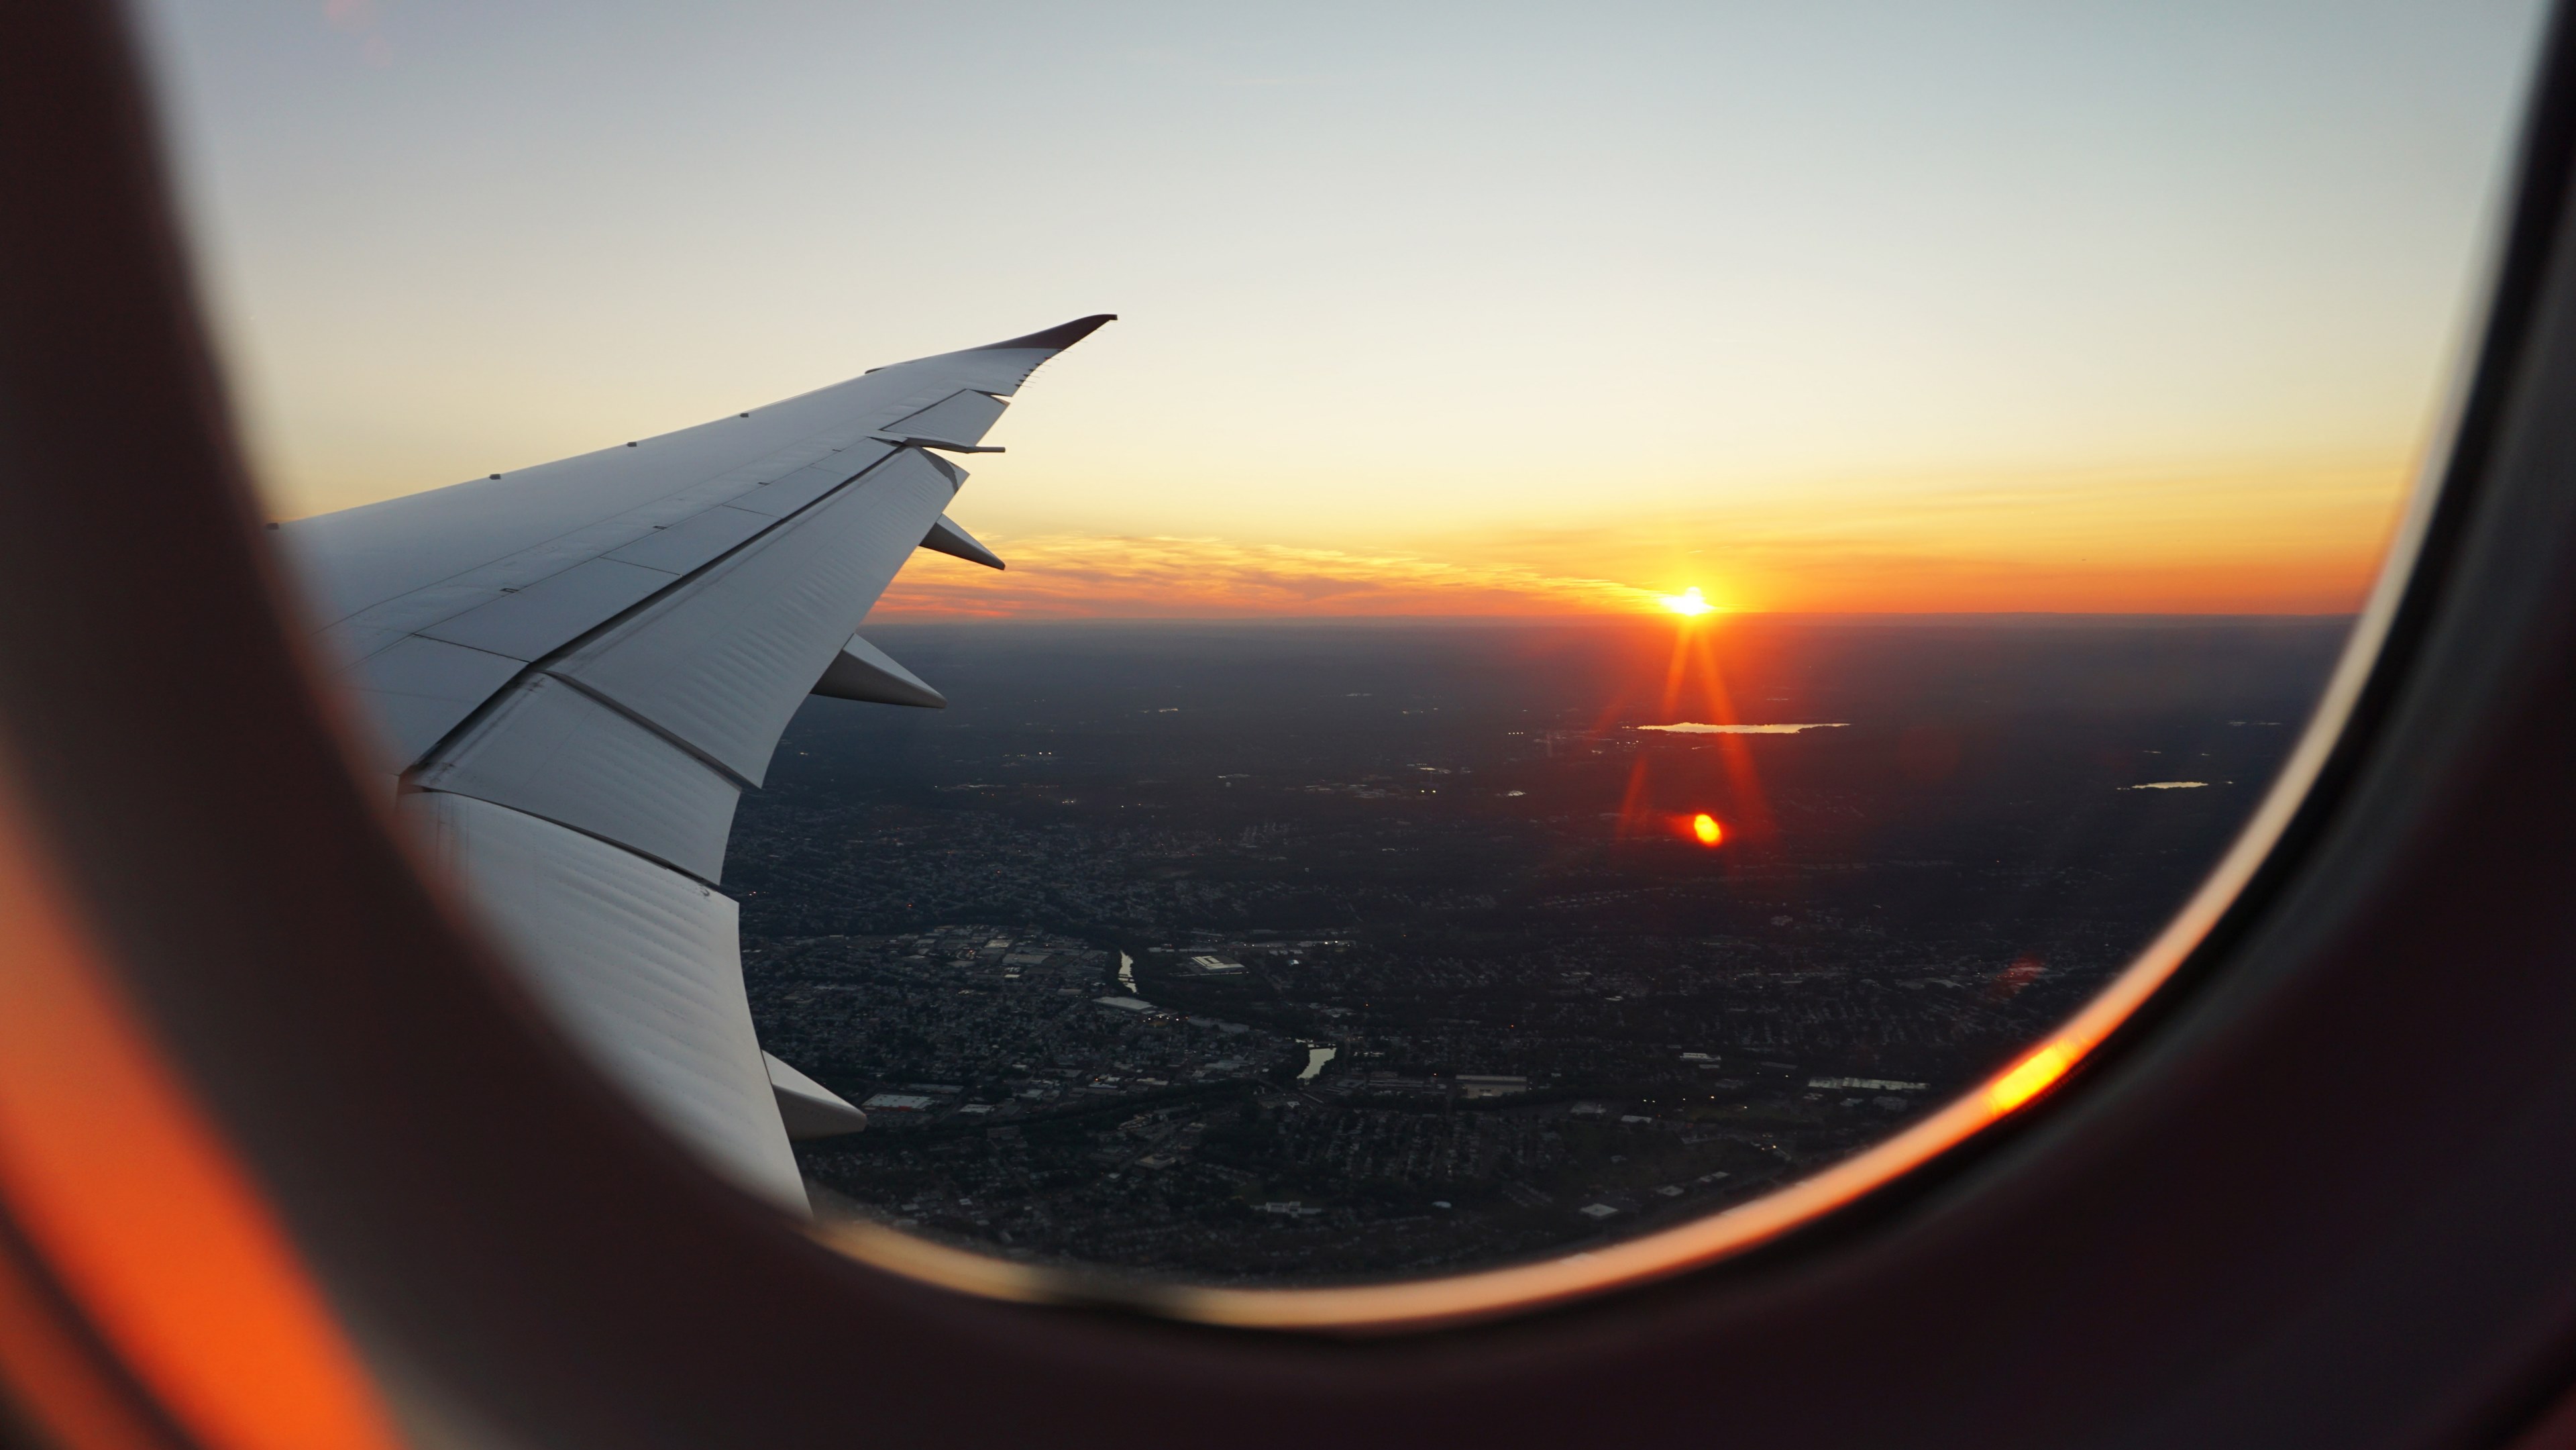 Wallpaper / a view from an airplane window on the sun setting on the horizon, sunset seen from a plane 4k wallpaper